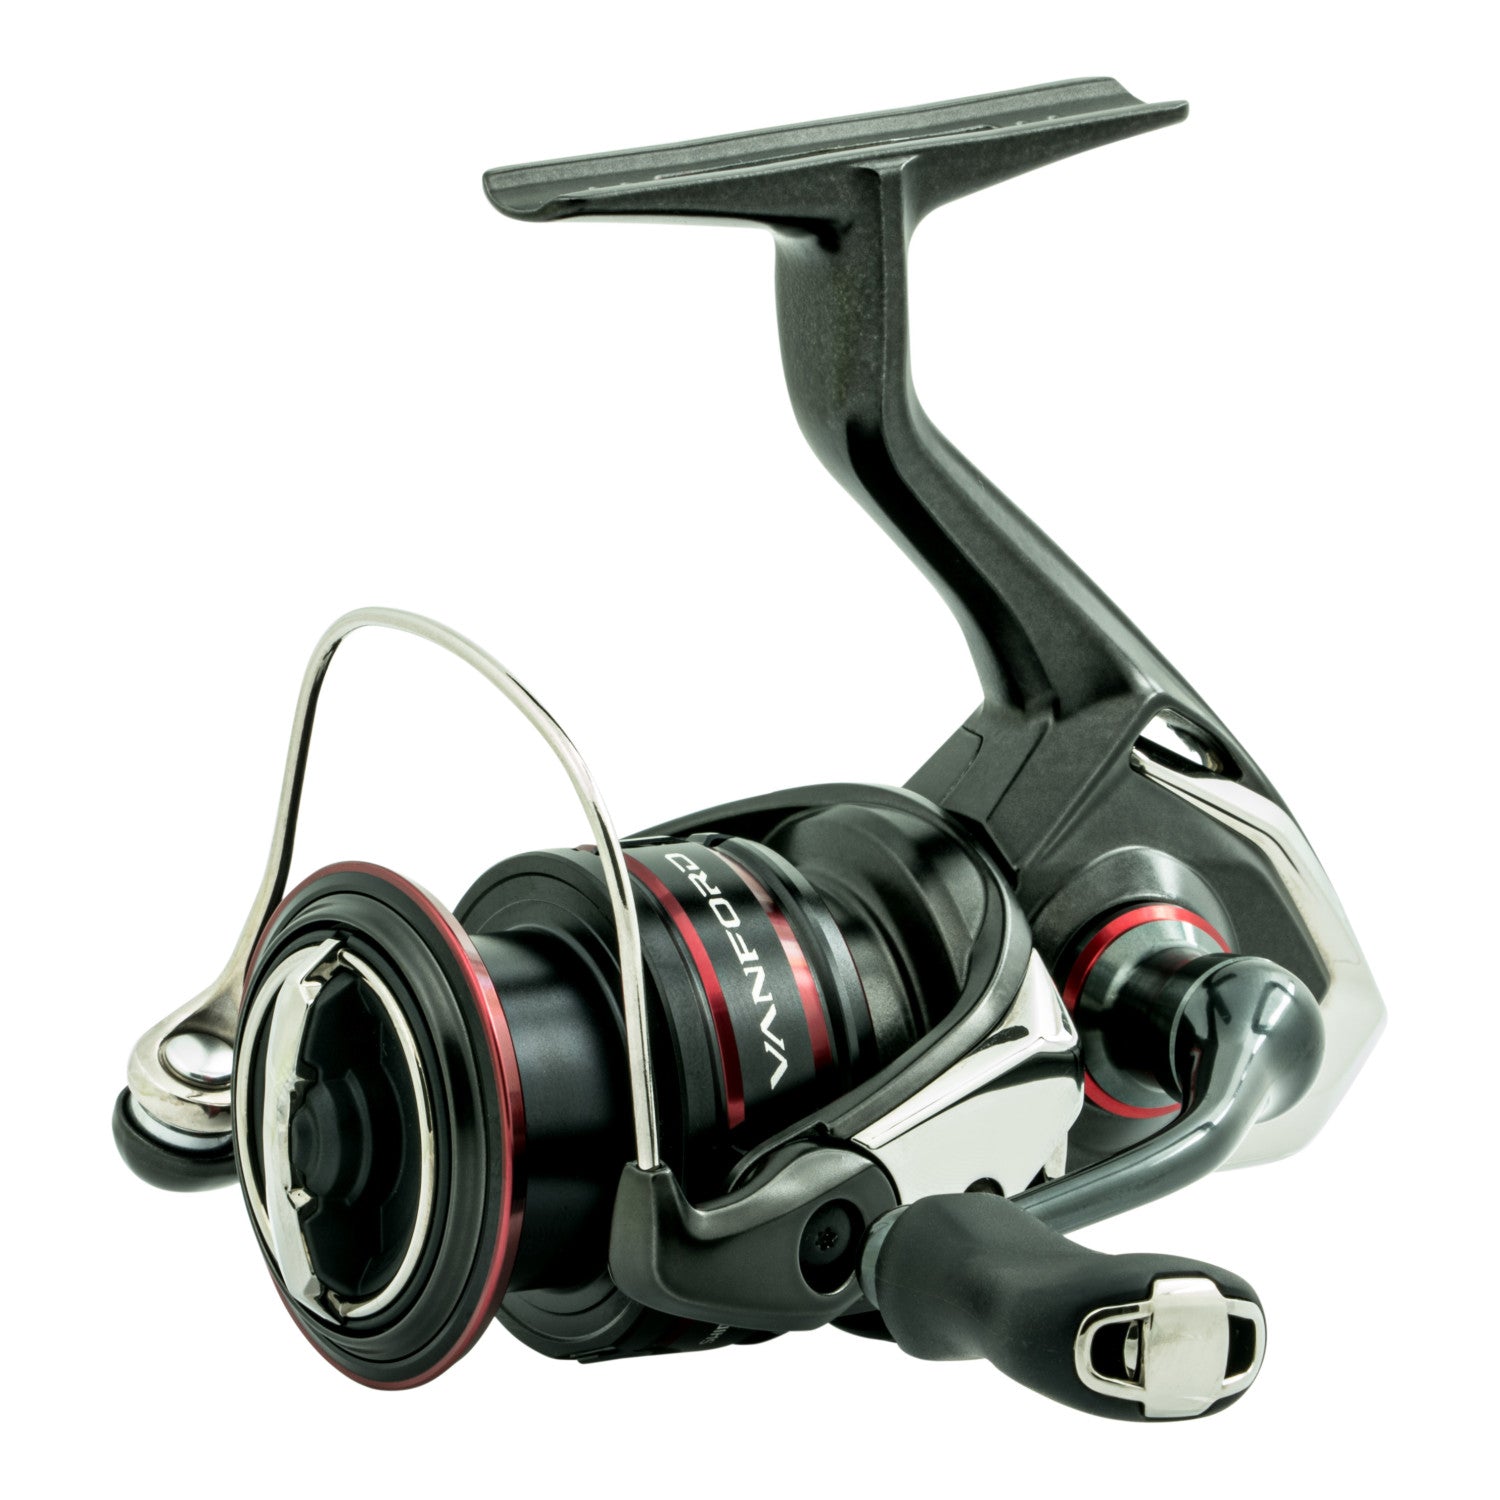 Shimano Axulsa Ultralight Spinning Reel 4.2:1 Gear Ratio, 18 Retreieve  Rate, 2 lb Max Drag, Ambidextrous, Clam Package